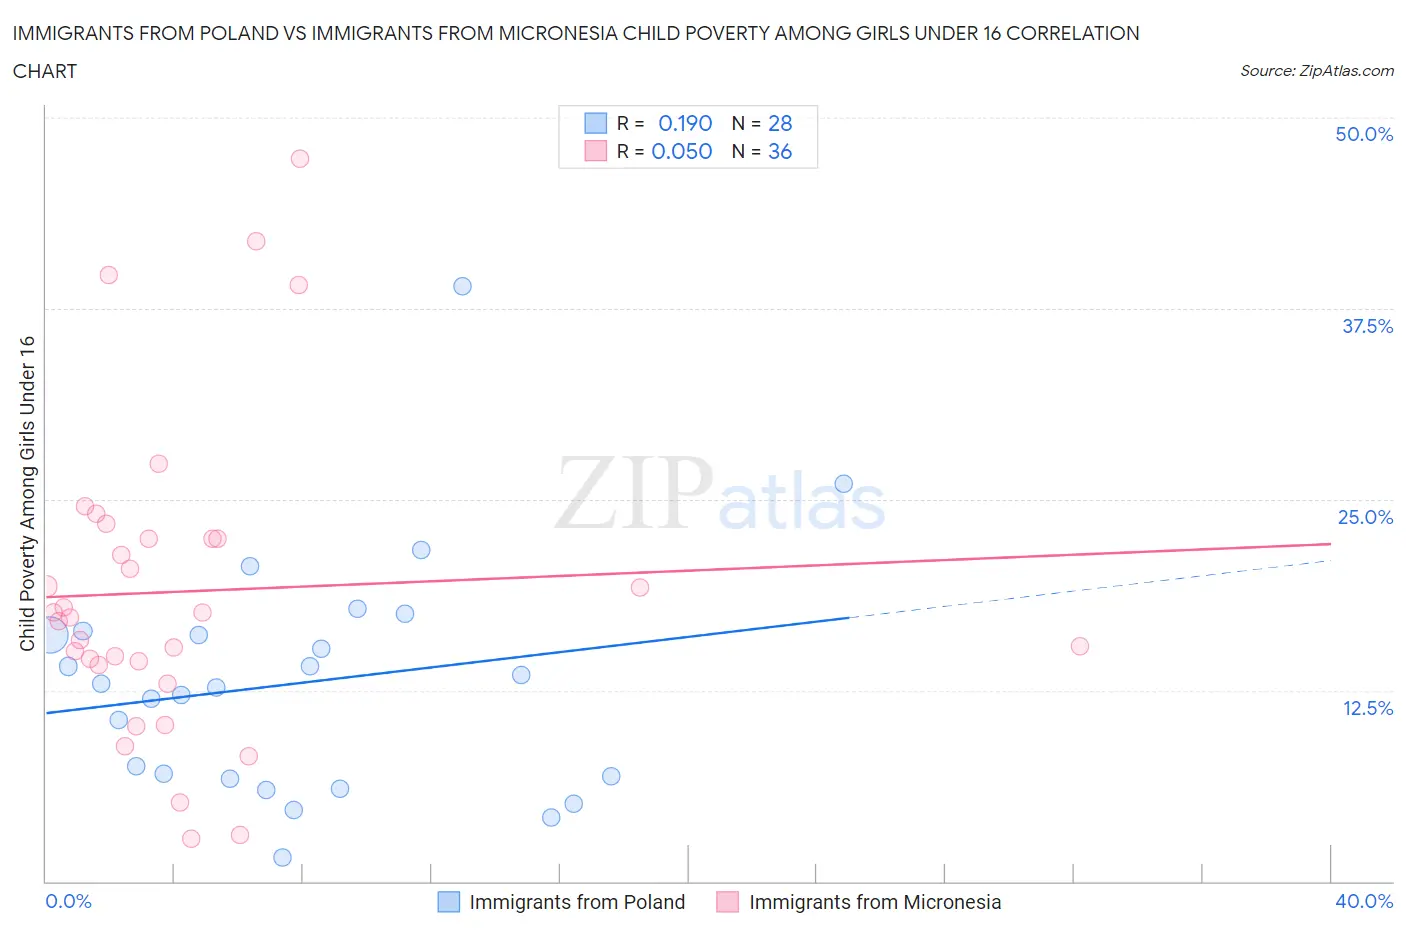 Immigrants from Poland vs Immigrants from Micronesia Child Poverty Among Girls Under 16